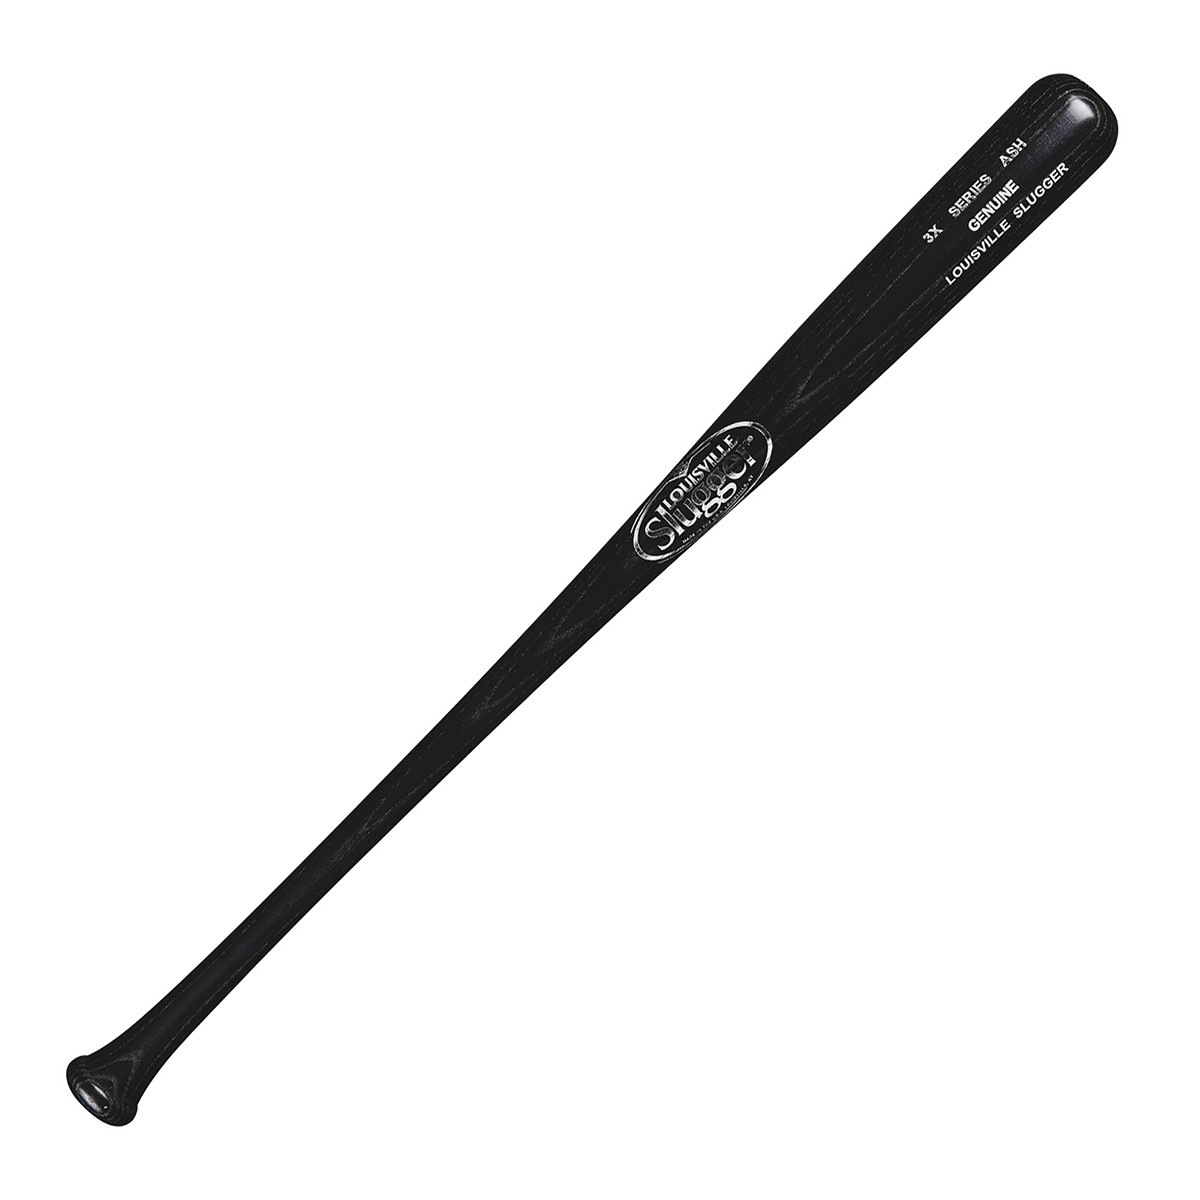 Louisville Slugger's adult wood bats are pulled from their original production line for some minor flaw that will not affect the bat's performance. These small production errors mean deep savings on superior bats ideal for practice, batting cages or even games. Series 3X Ash Black Finish Mixed Turning Model Regular Finish